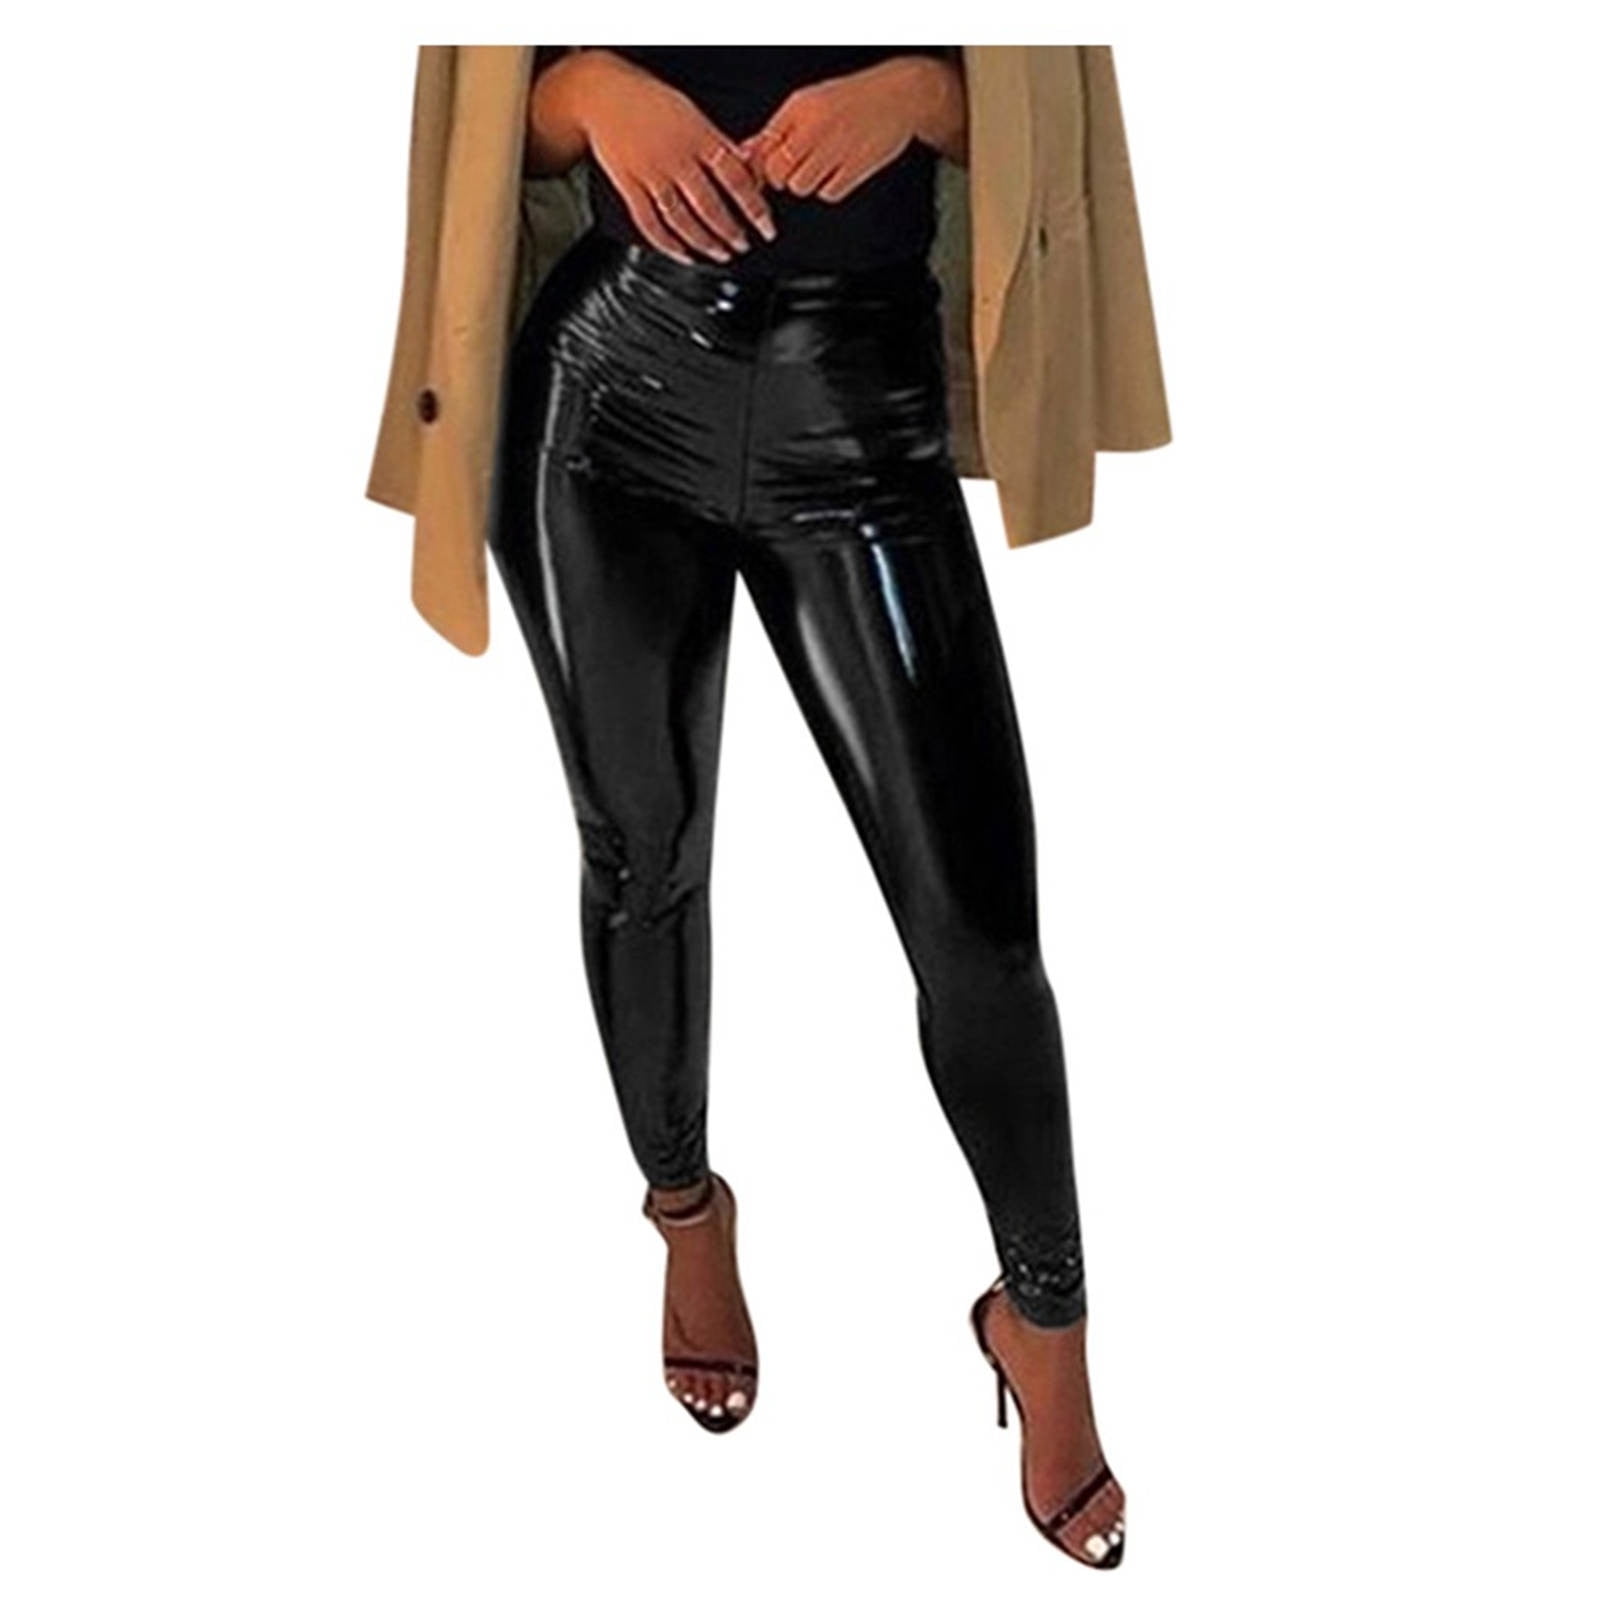 Shpwfbe Leather Pants Leggings For Women Leather Fashion High